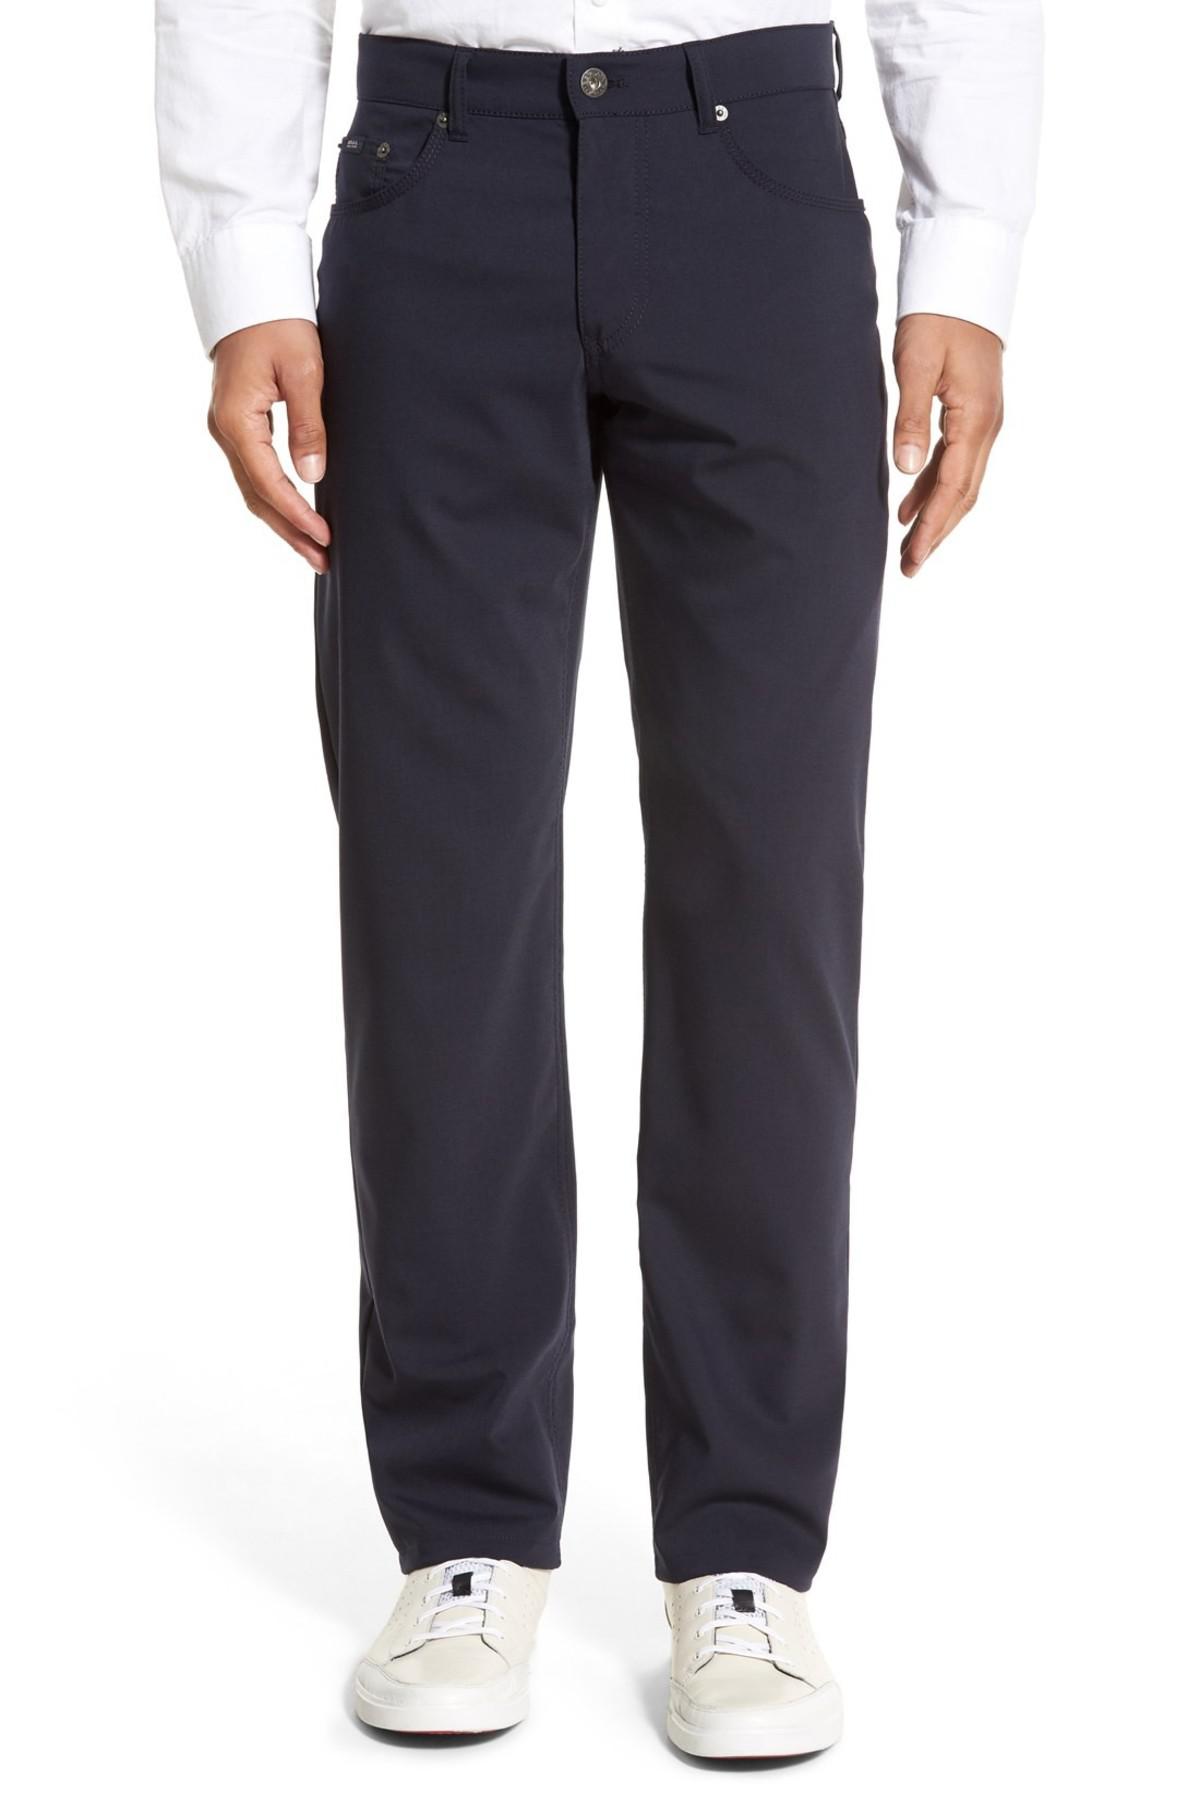 Lyst - Brax 'manager' Five-pocket Wool Pants in Blue for Men